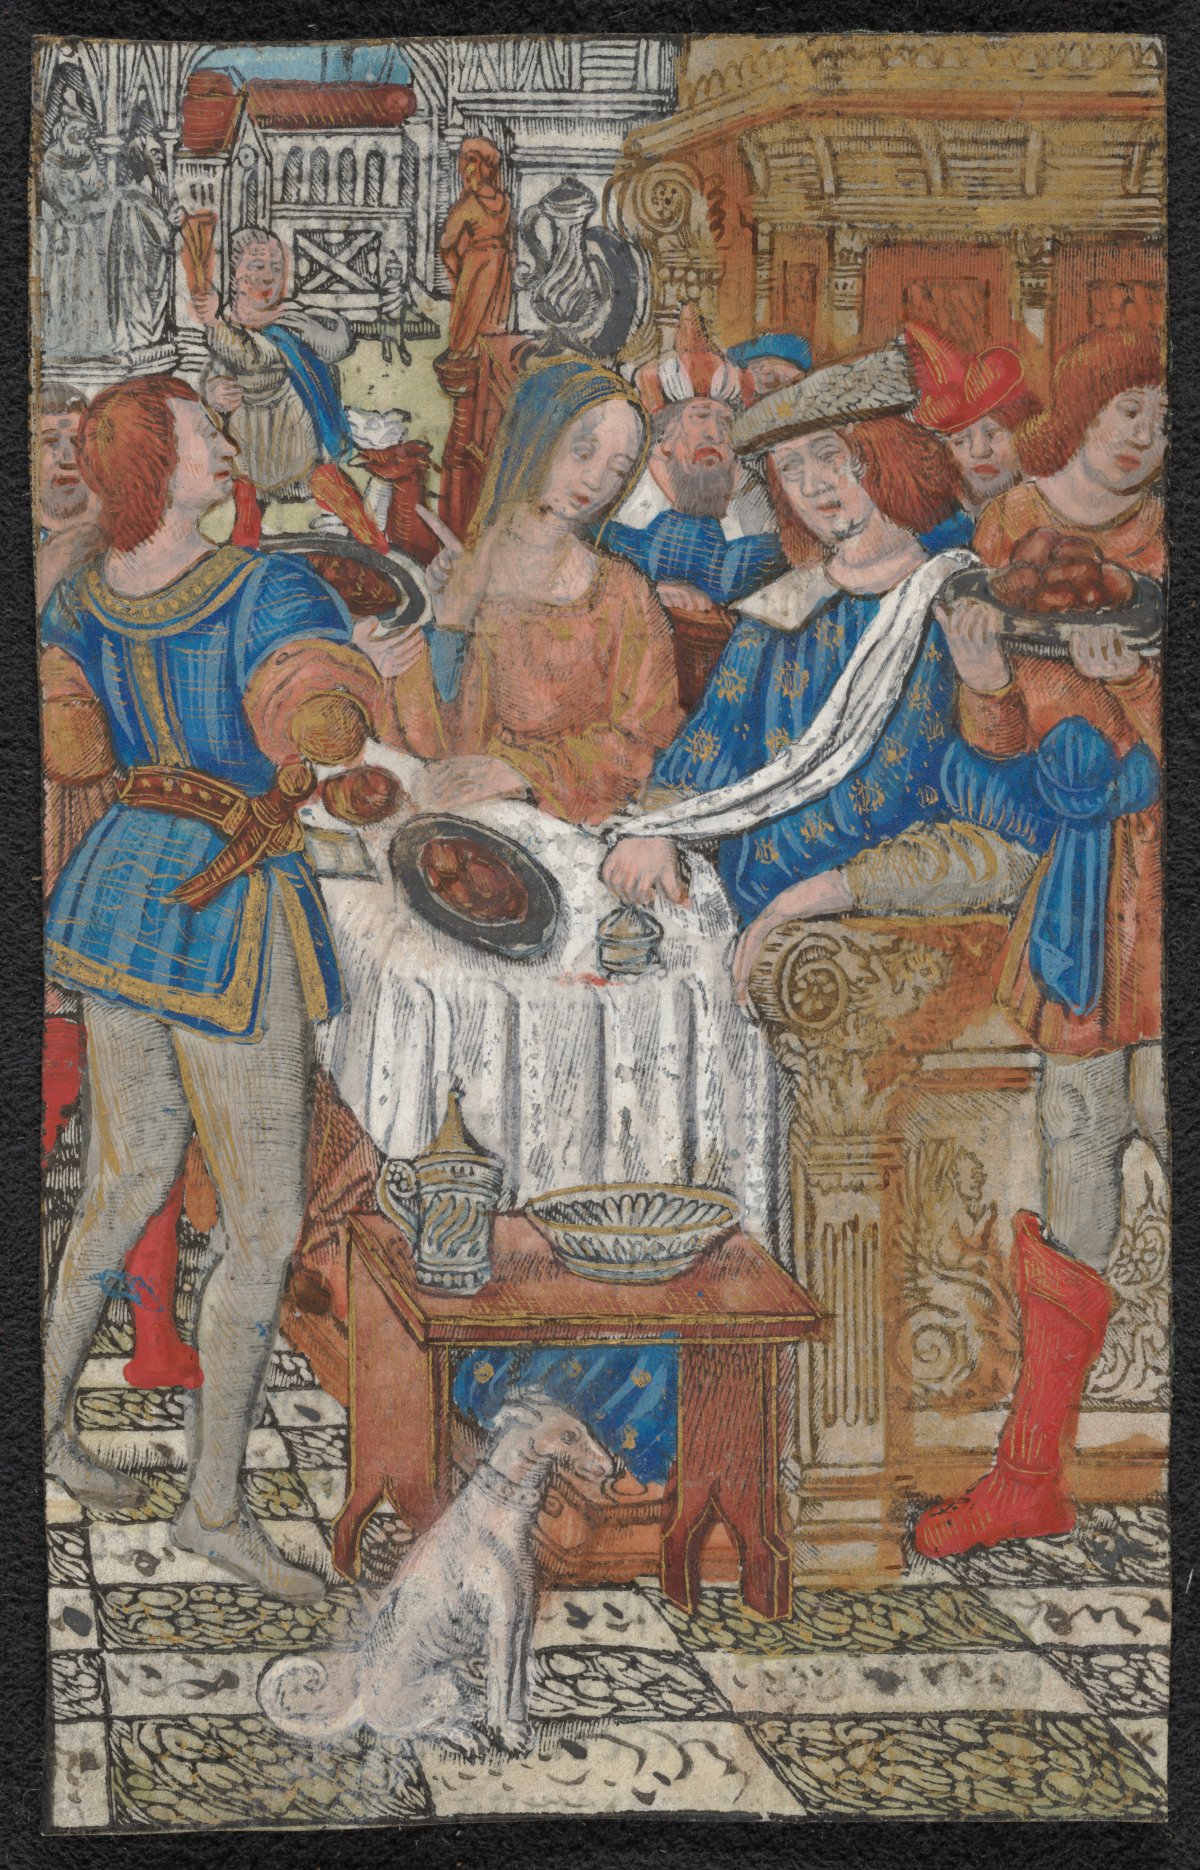 A colourful image of a feast. Men and women are dressed in colourful clothes. There is a table with a white tablecloth. There is a plate of food on the table.